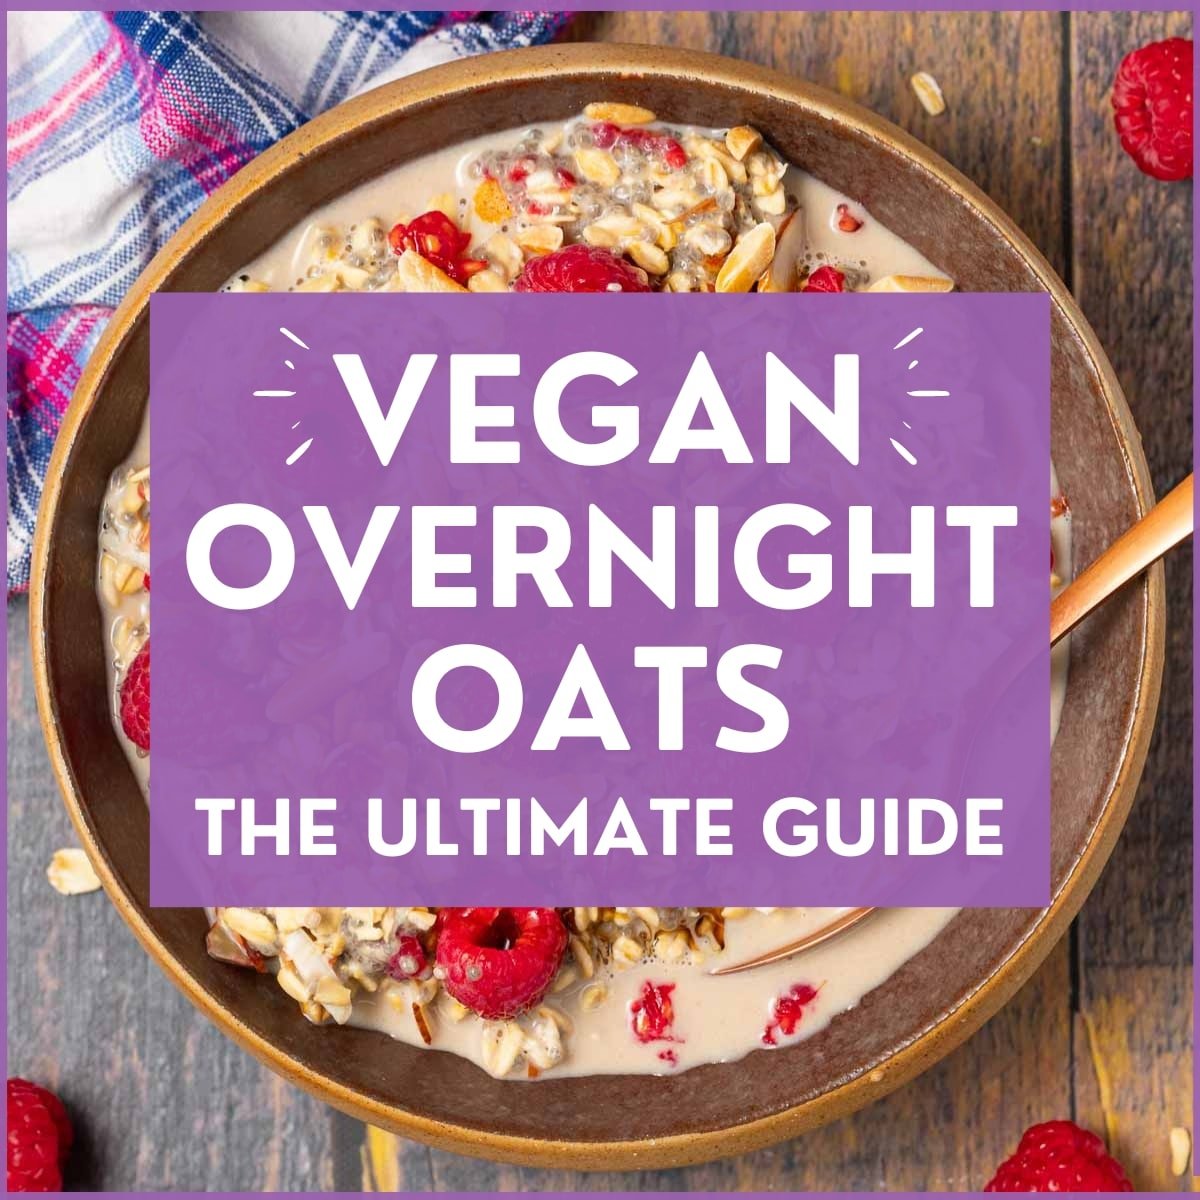 How to Make Vegan Overnight Oats Quick and Easy